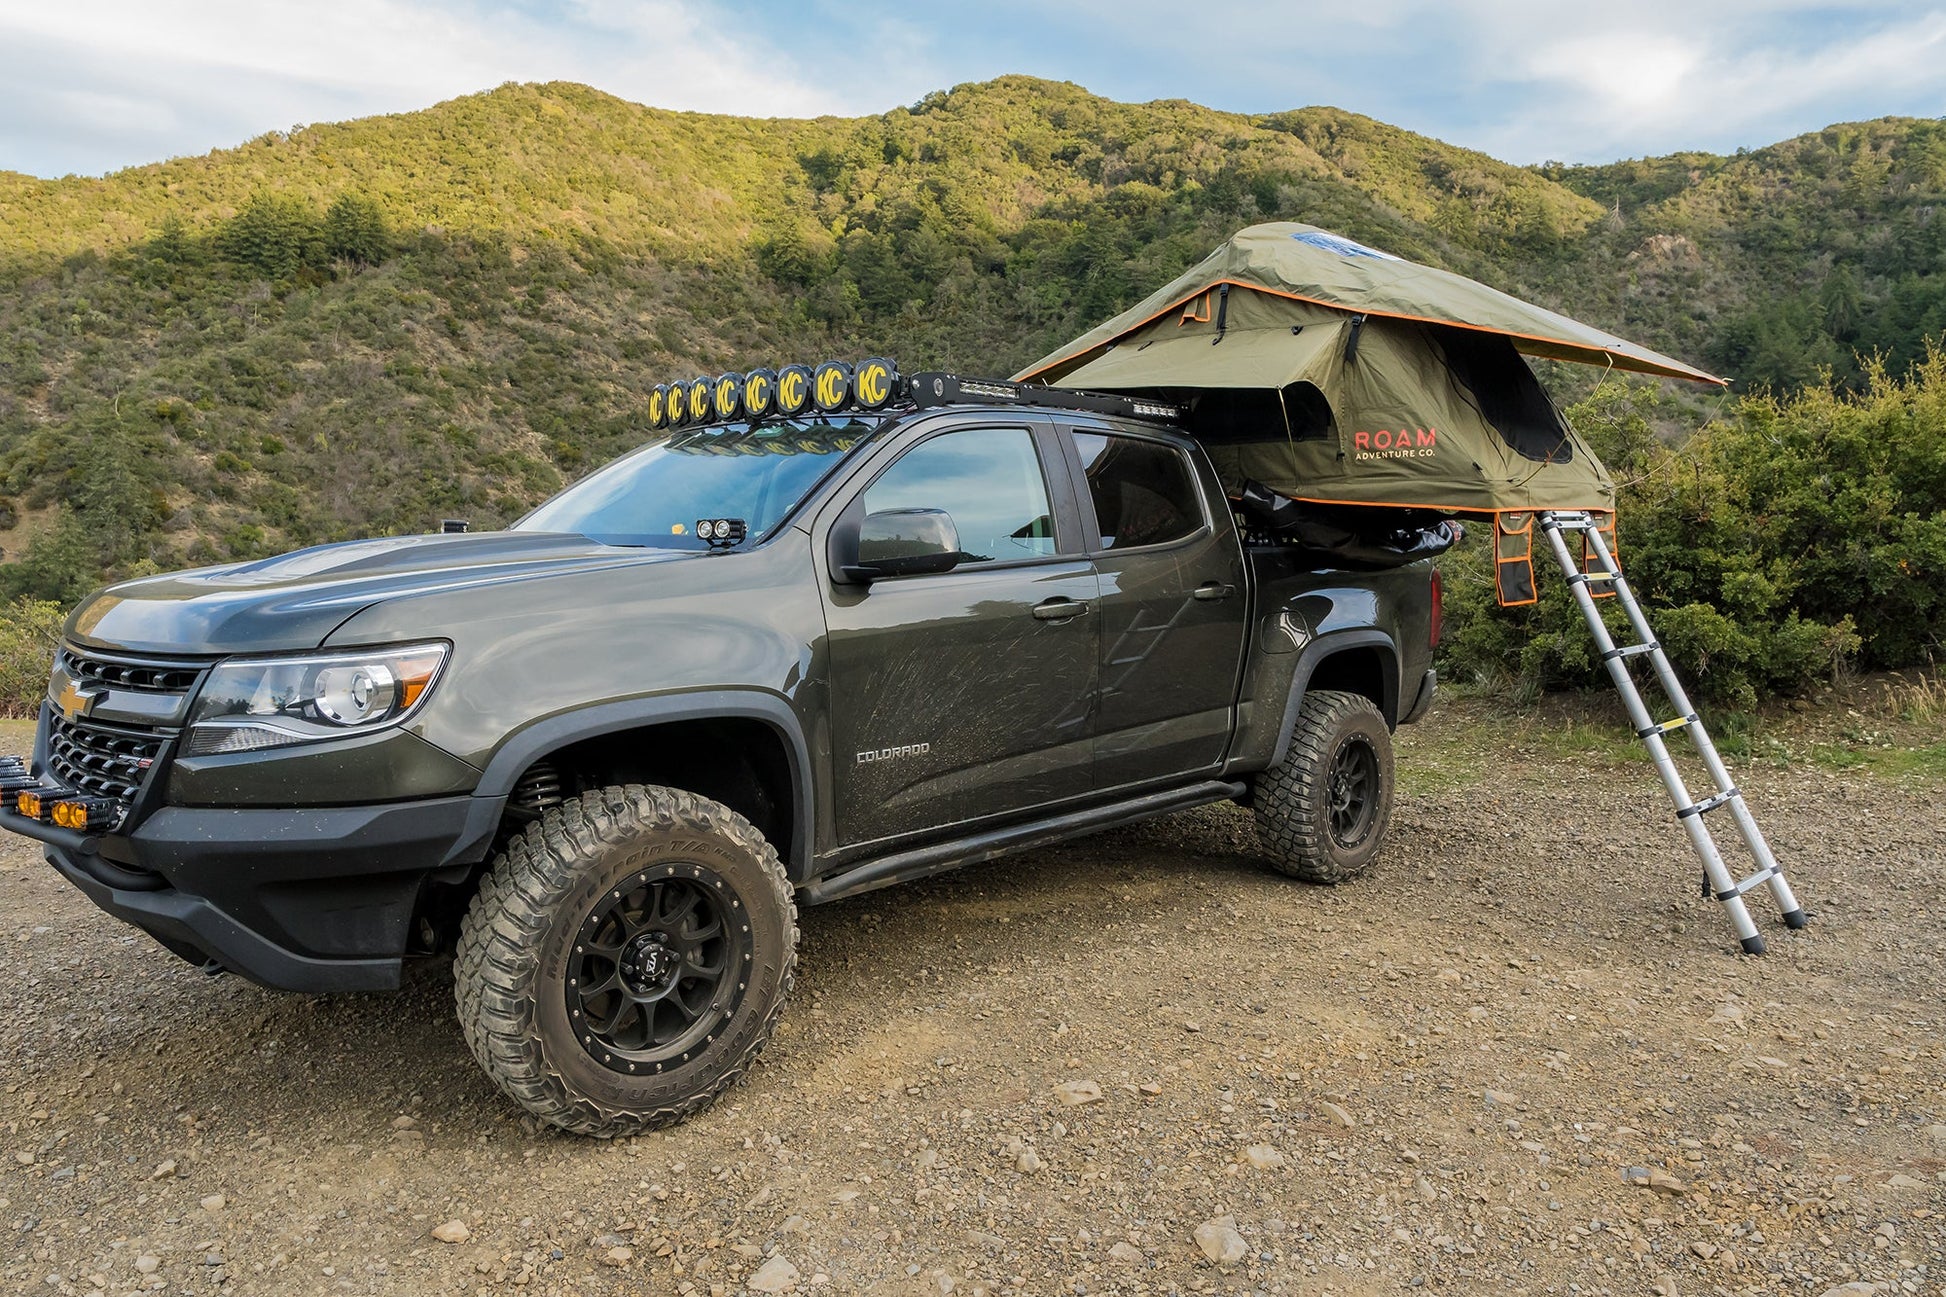 Vagabond Lite Rooftop Tent in Forest Green Hyper Orange on a Chevy Colorado Truck